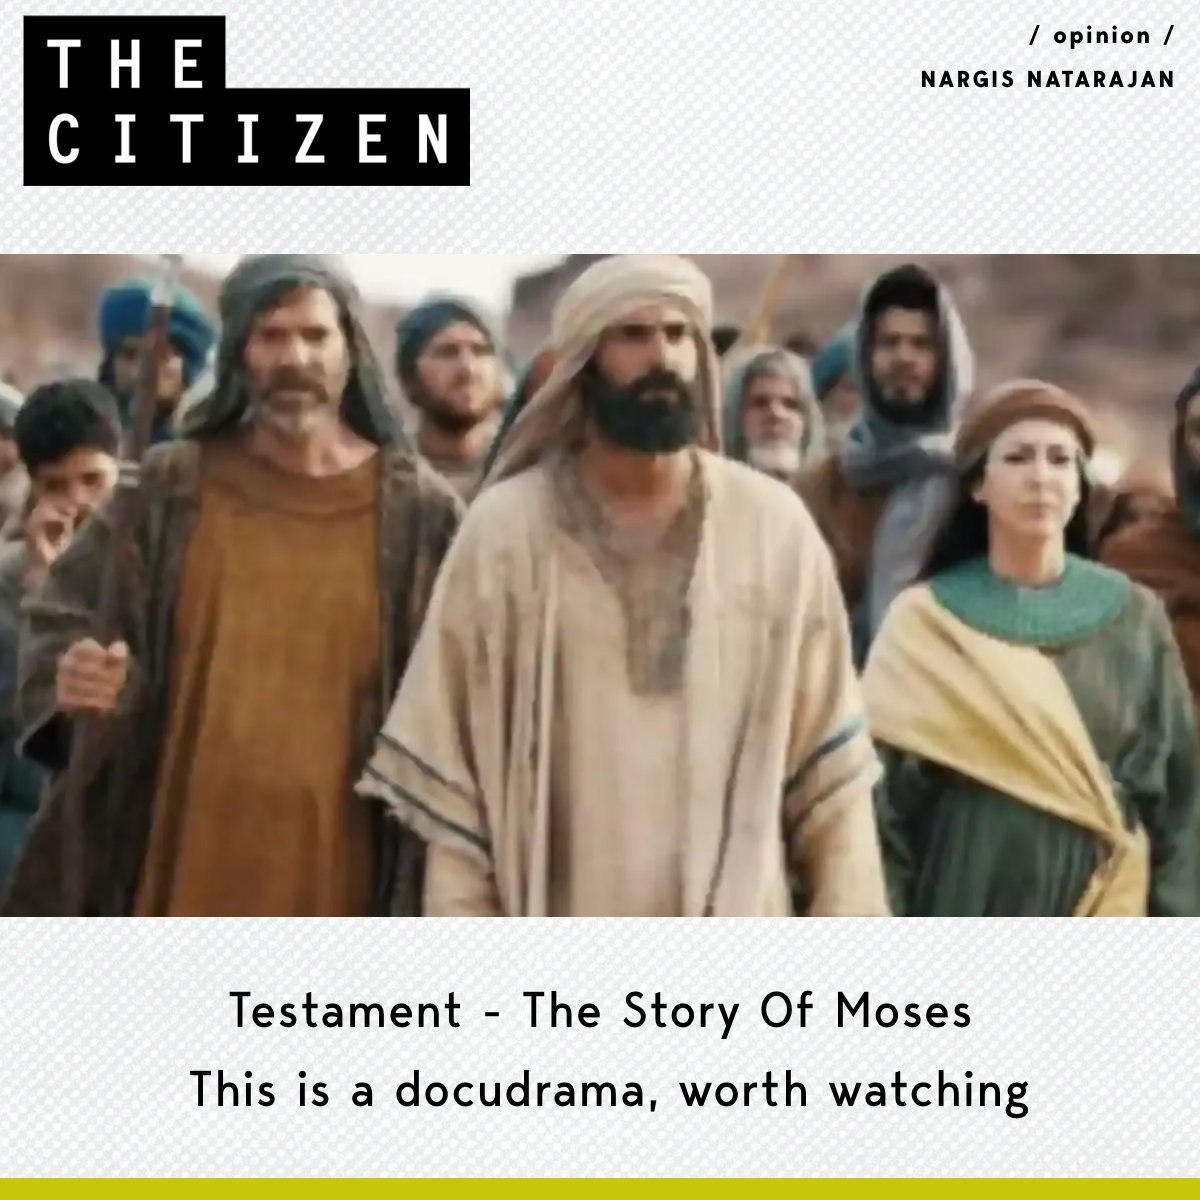 Human redemption starts only when people bravely stand up together to revolt against injustice. @nargisnatarajan writes: Read the full report here: tinyurl.com/2vhv2zxv #testament #docudrama #watchnow @netflix